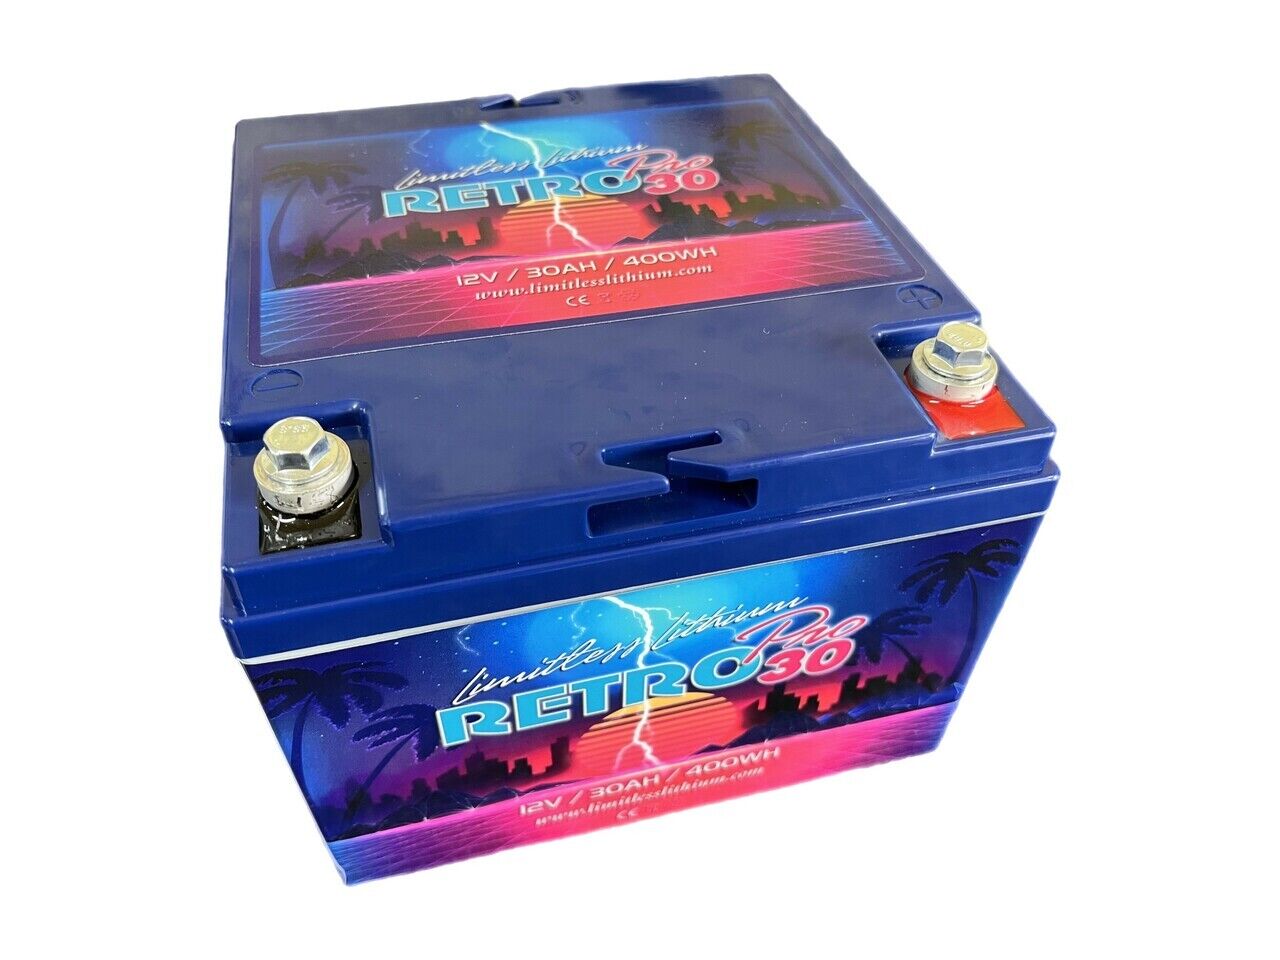 Limitless Lithium - Retro Pro 30 Lithium Battery Group 30 12V Max Charge 14.8V